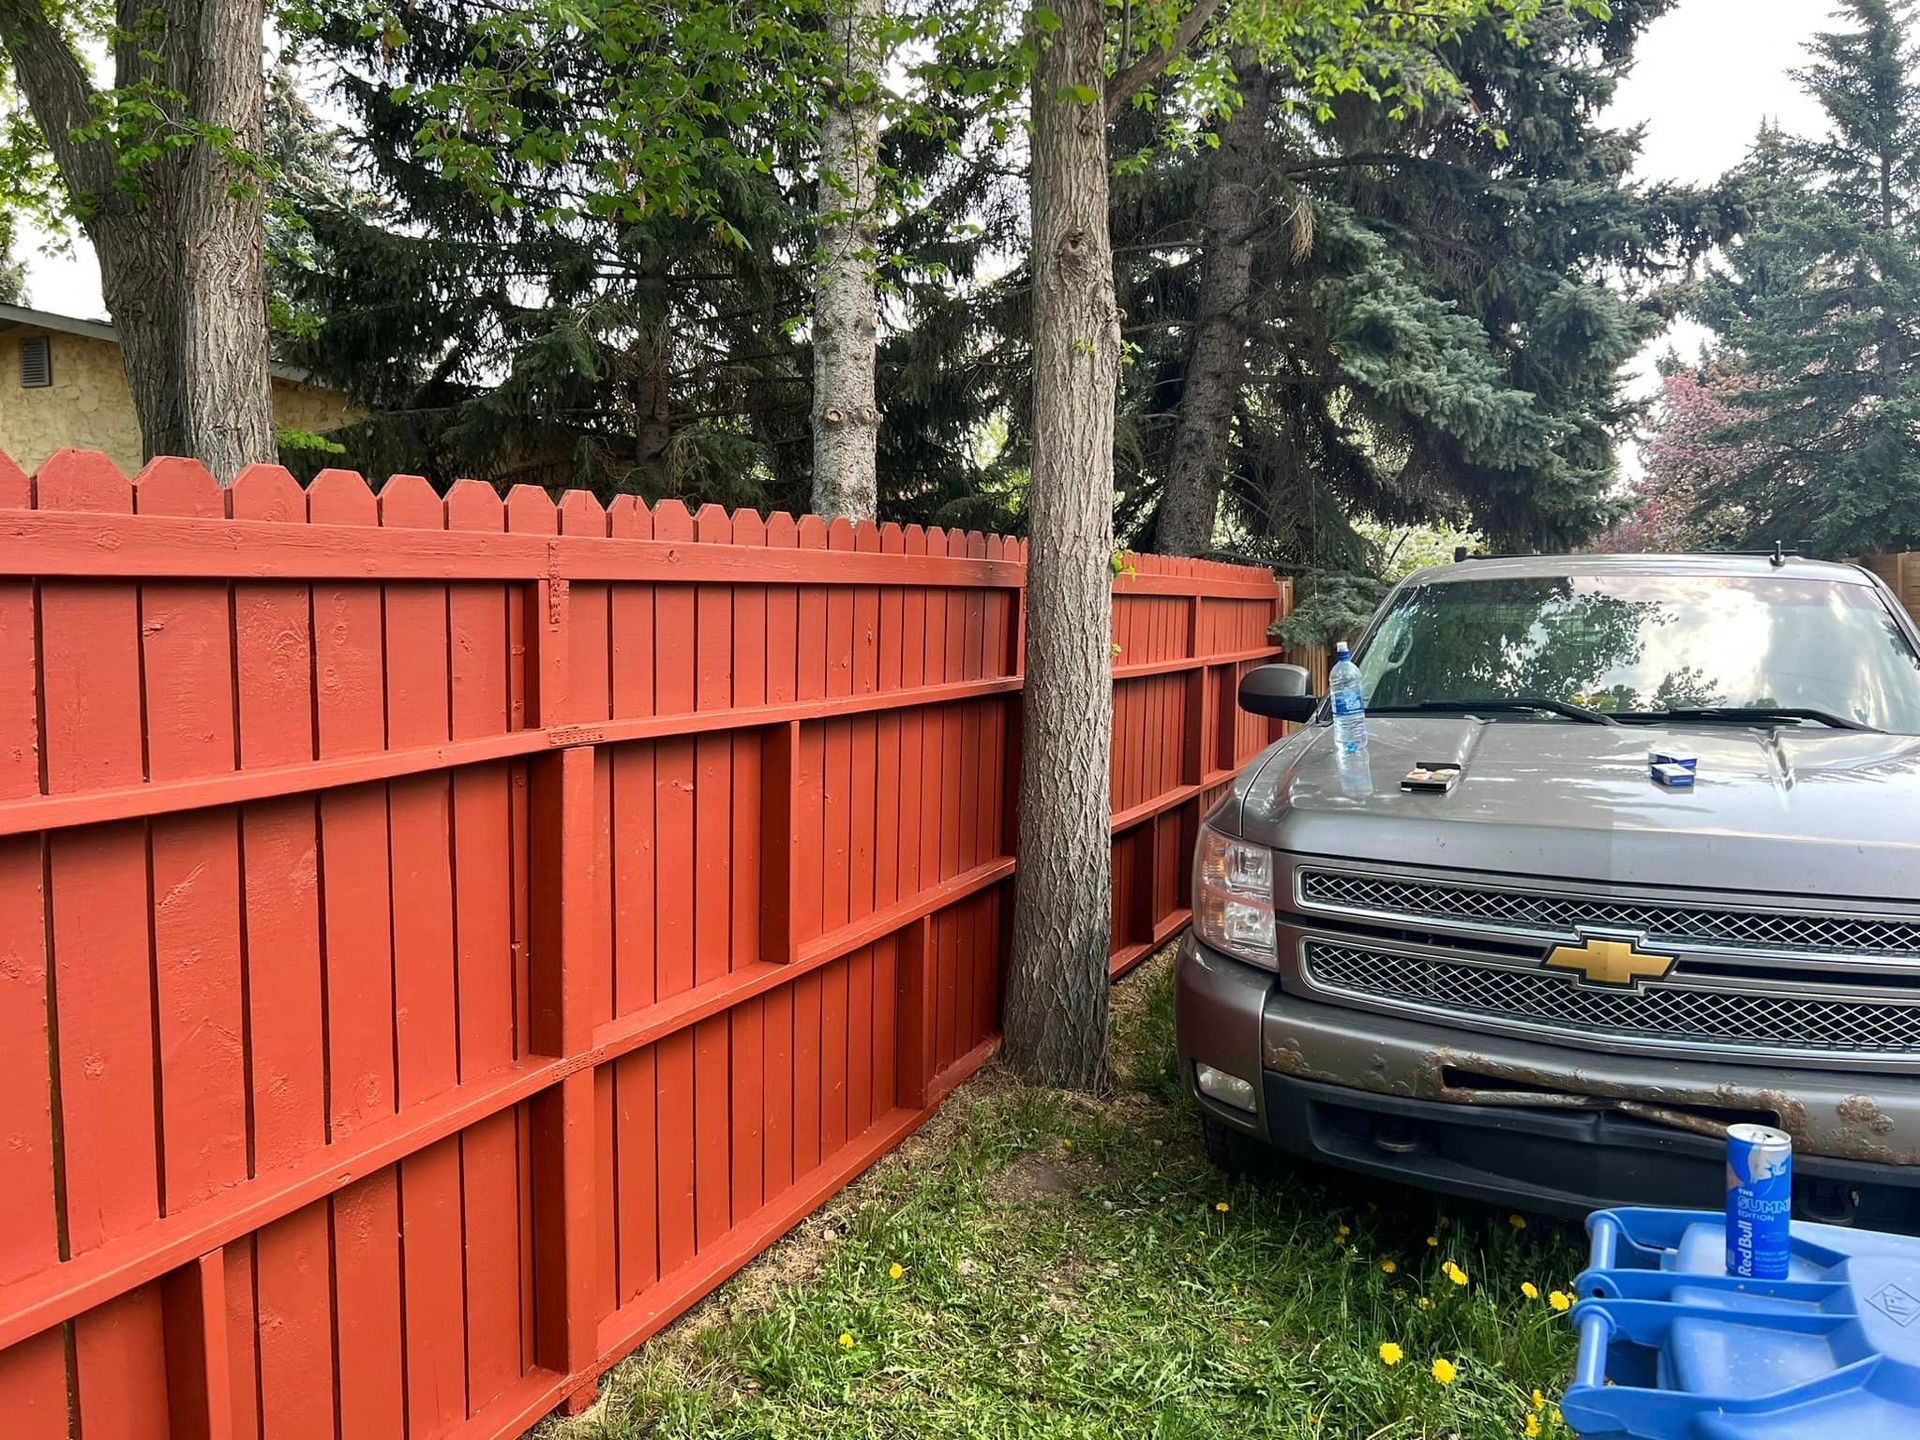 A gray truck is parked next to a red wooden fence.